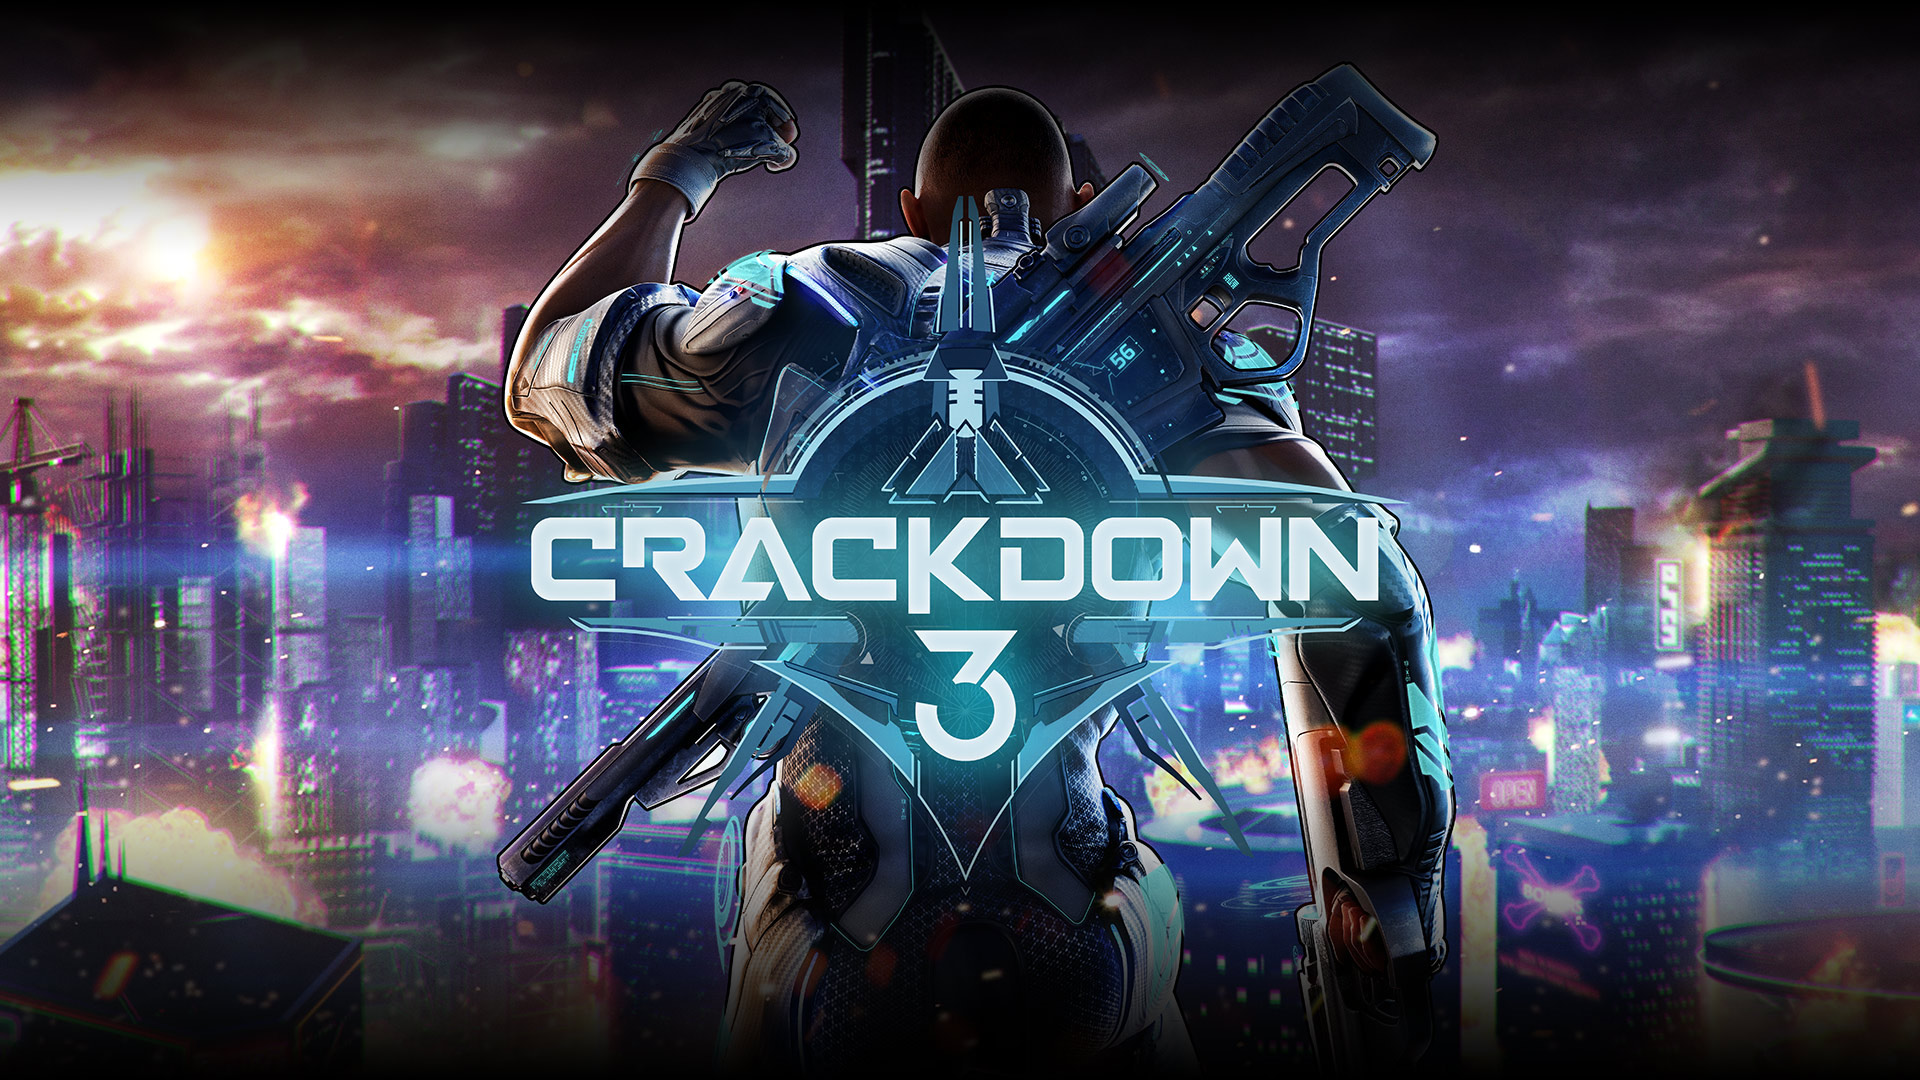 Download Crackdown 2 for free on Xbox One today